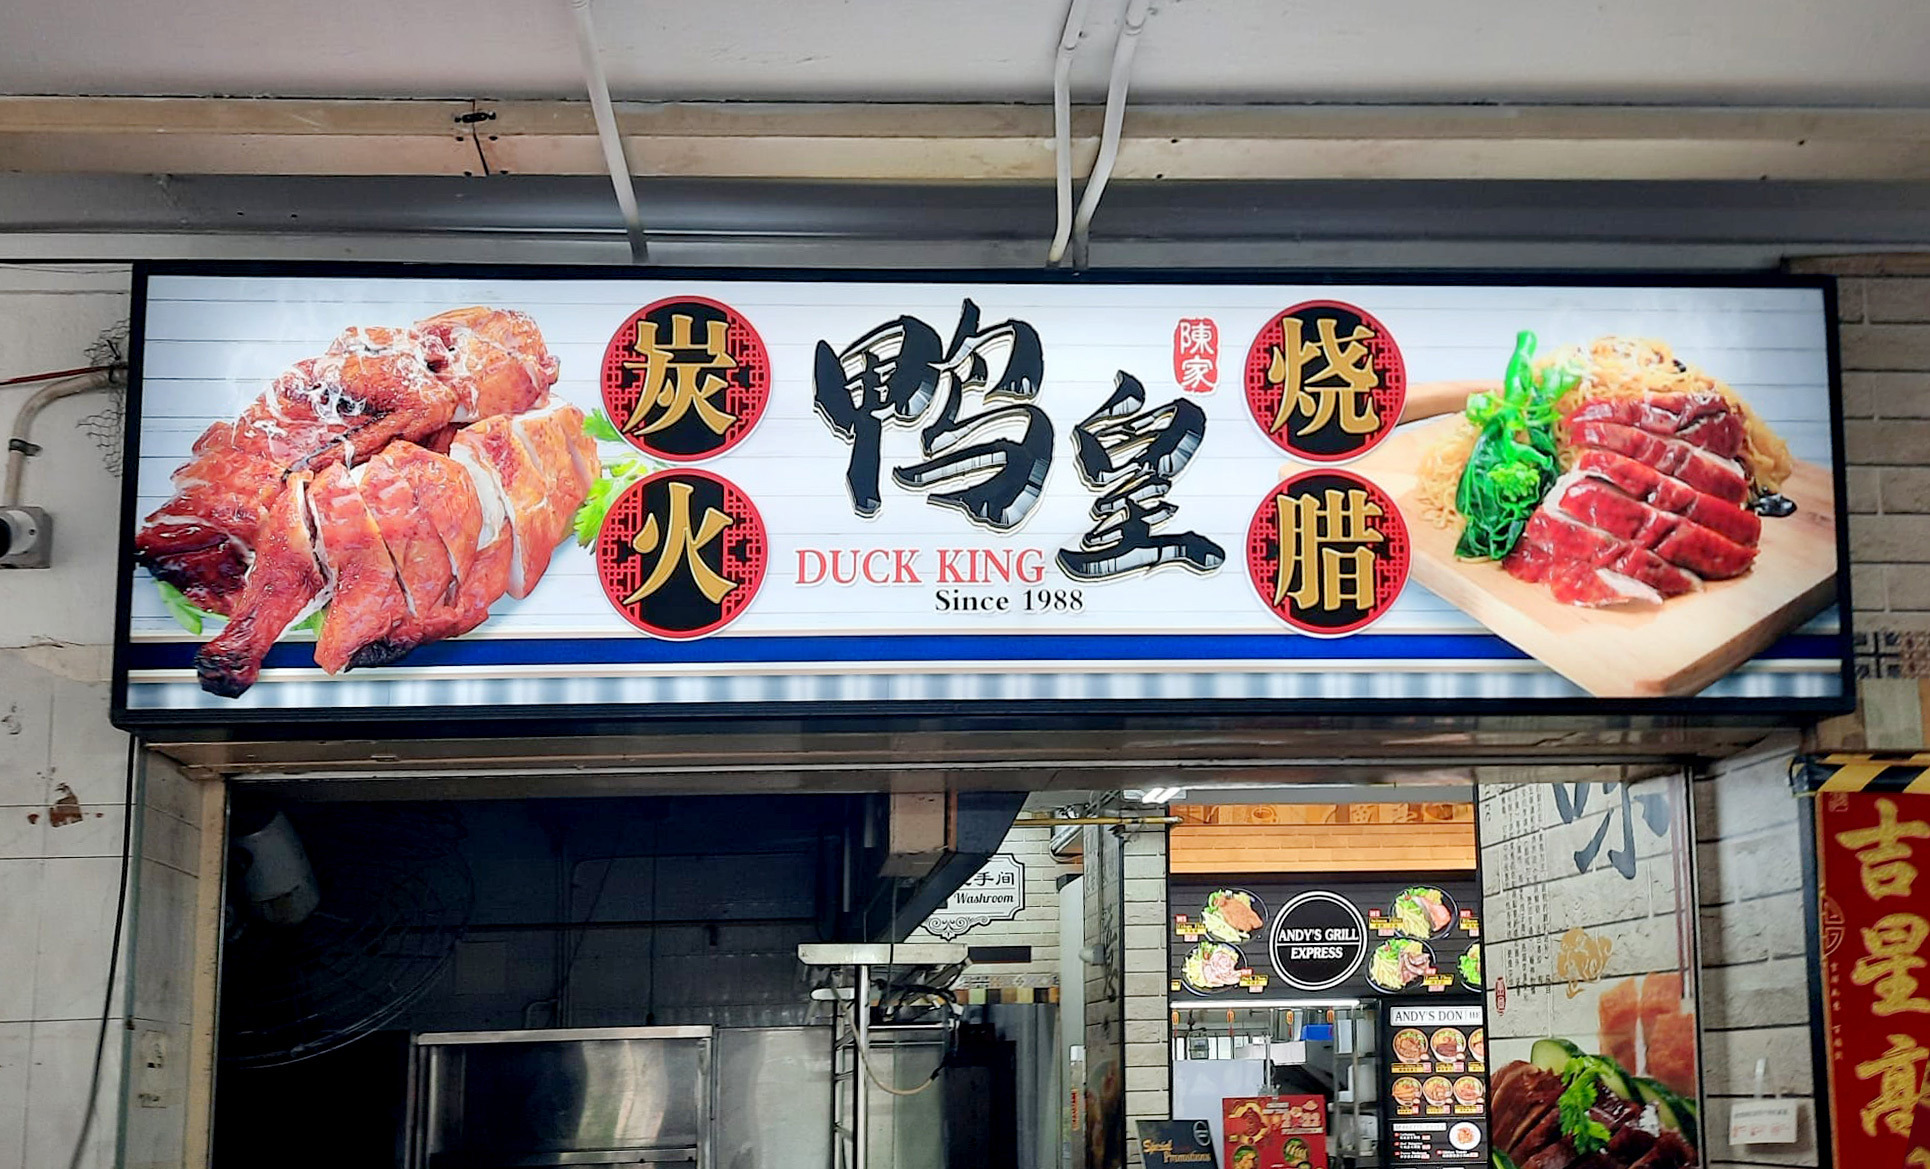 Duck King has three other outlets